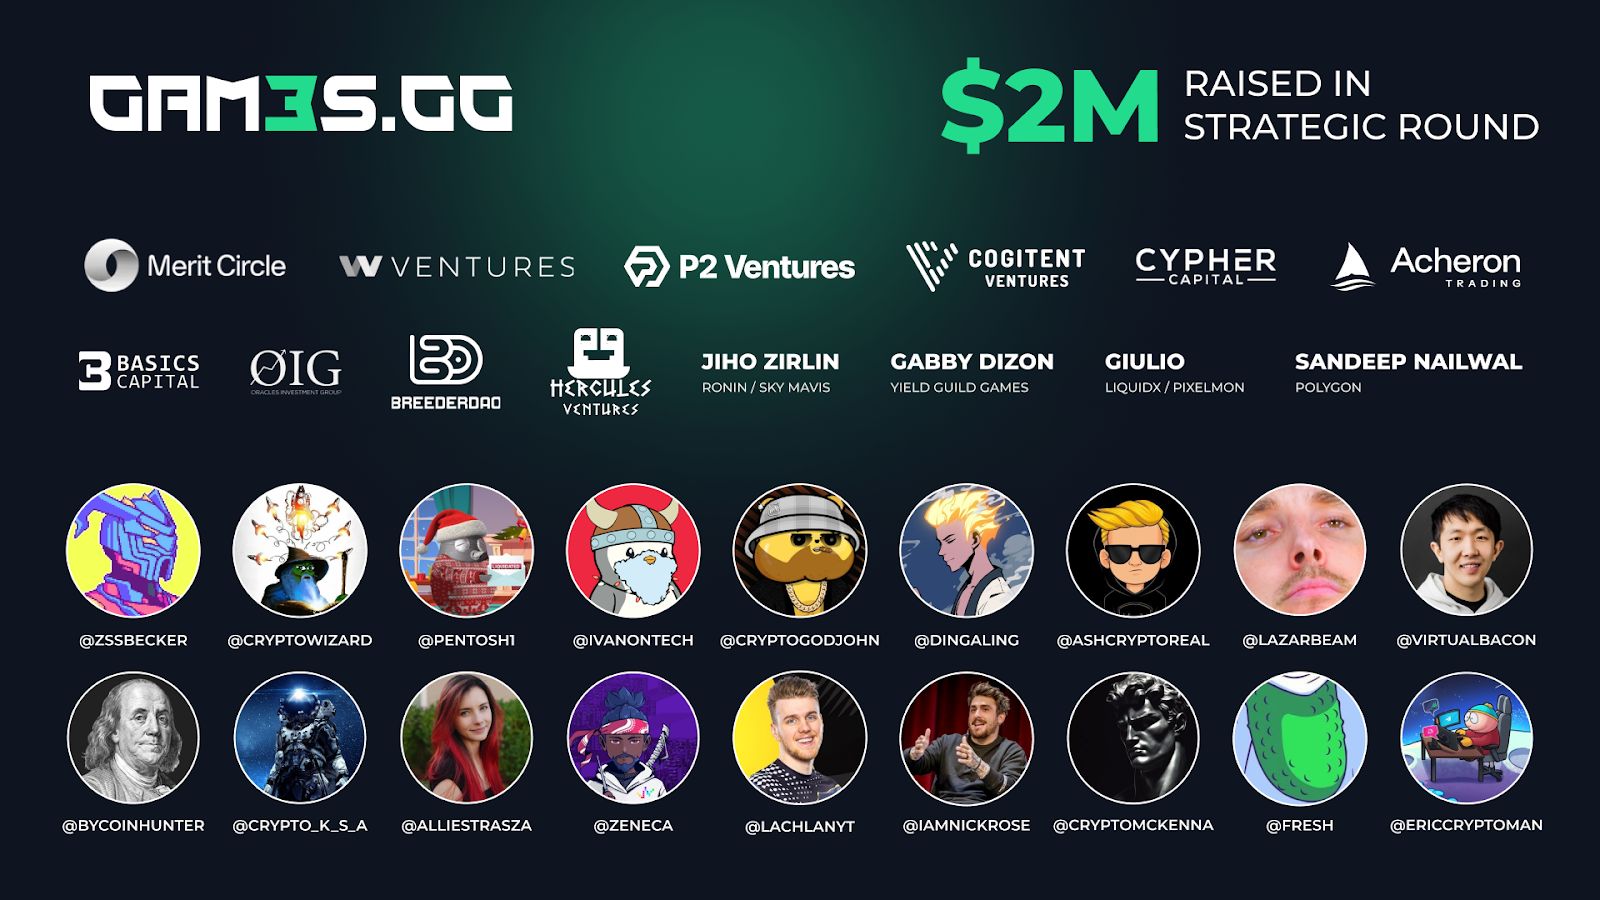 GAM3S.GG Secures $2M Funding, All Set for $G3 Token Launch for Gamers